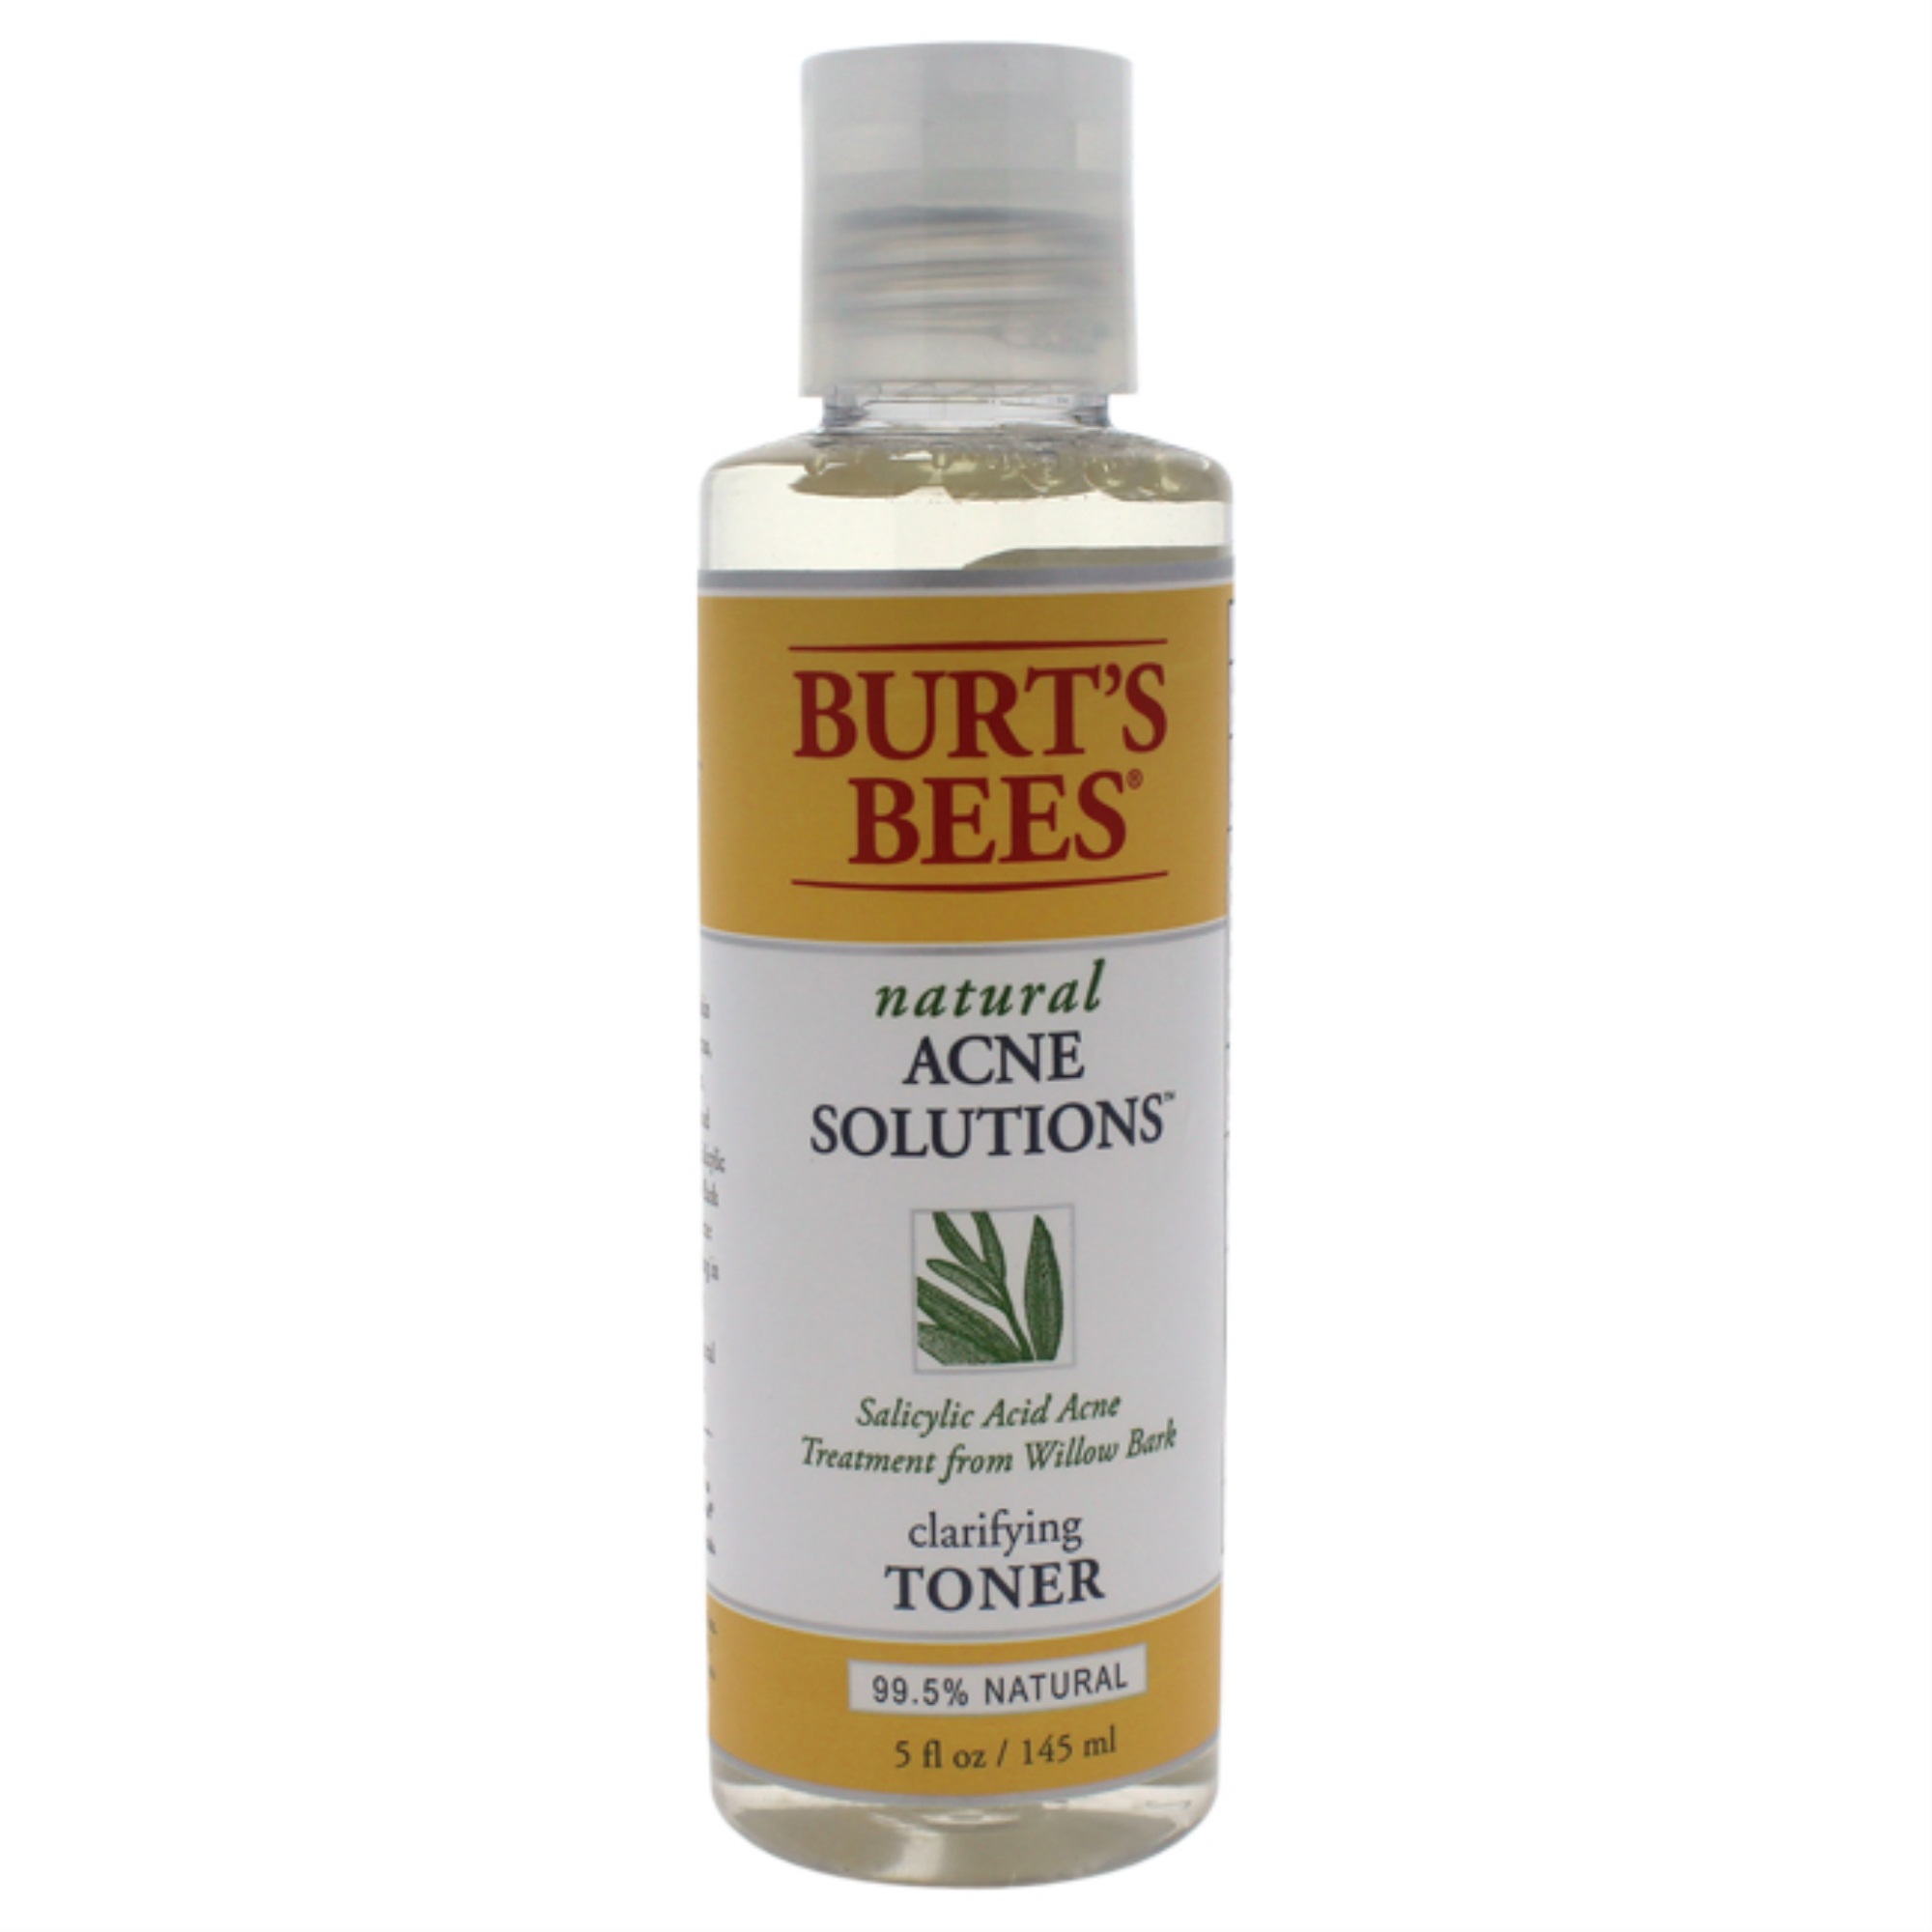 Burts Bees Natural Acne Solutions Clarifying Toner by Burts Bees for Unisex - 5 oz Toner